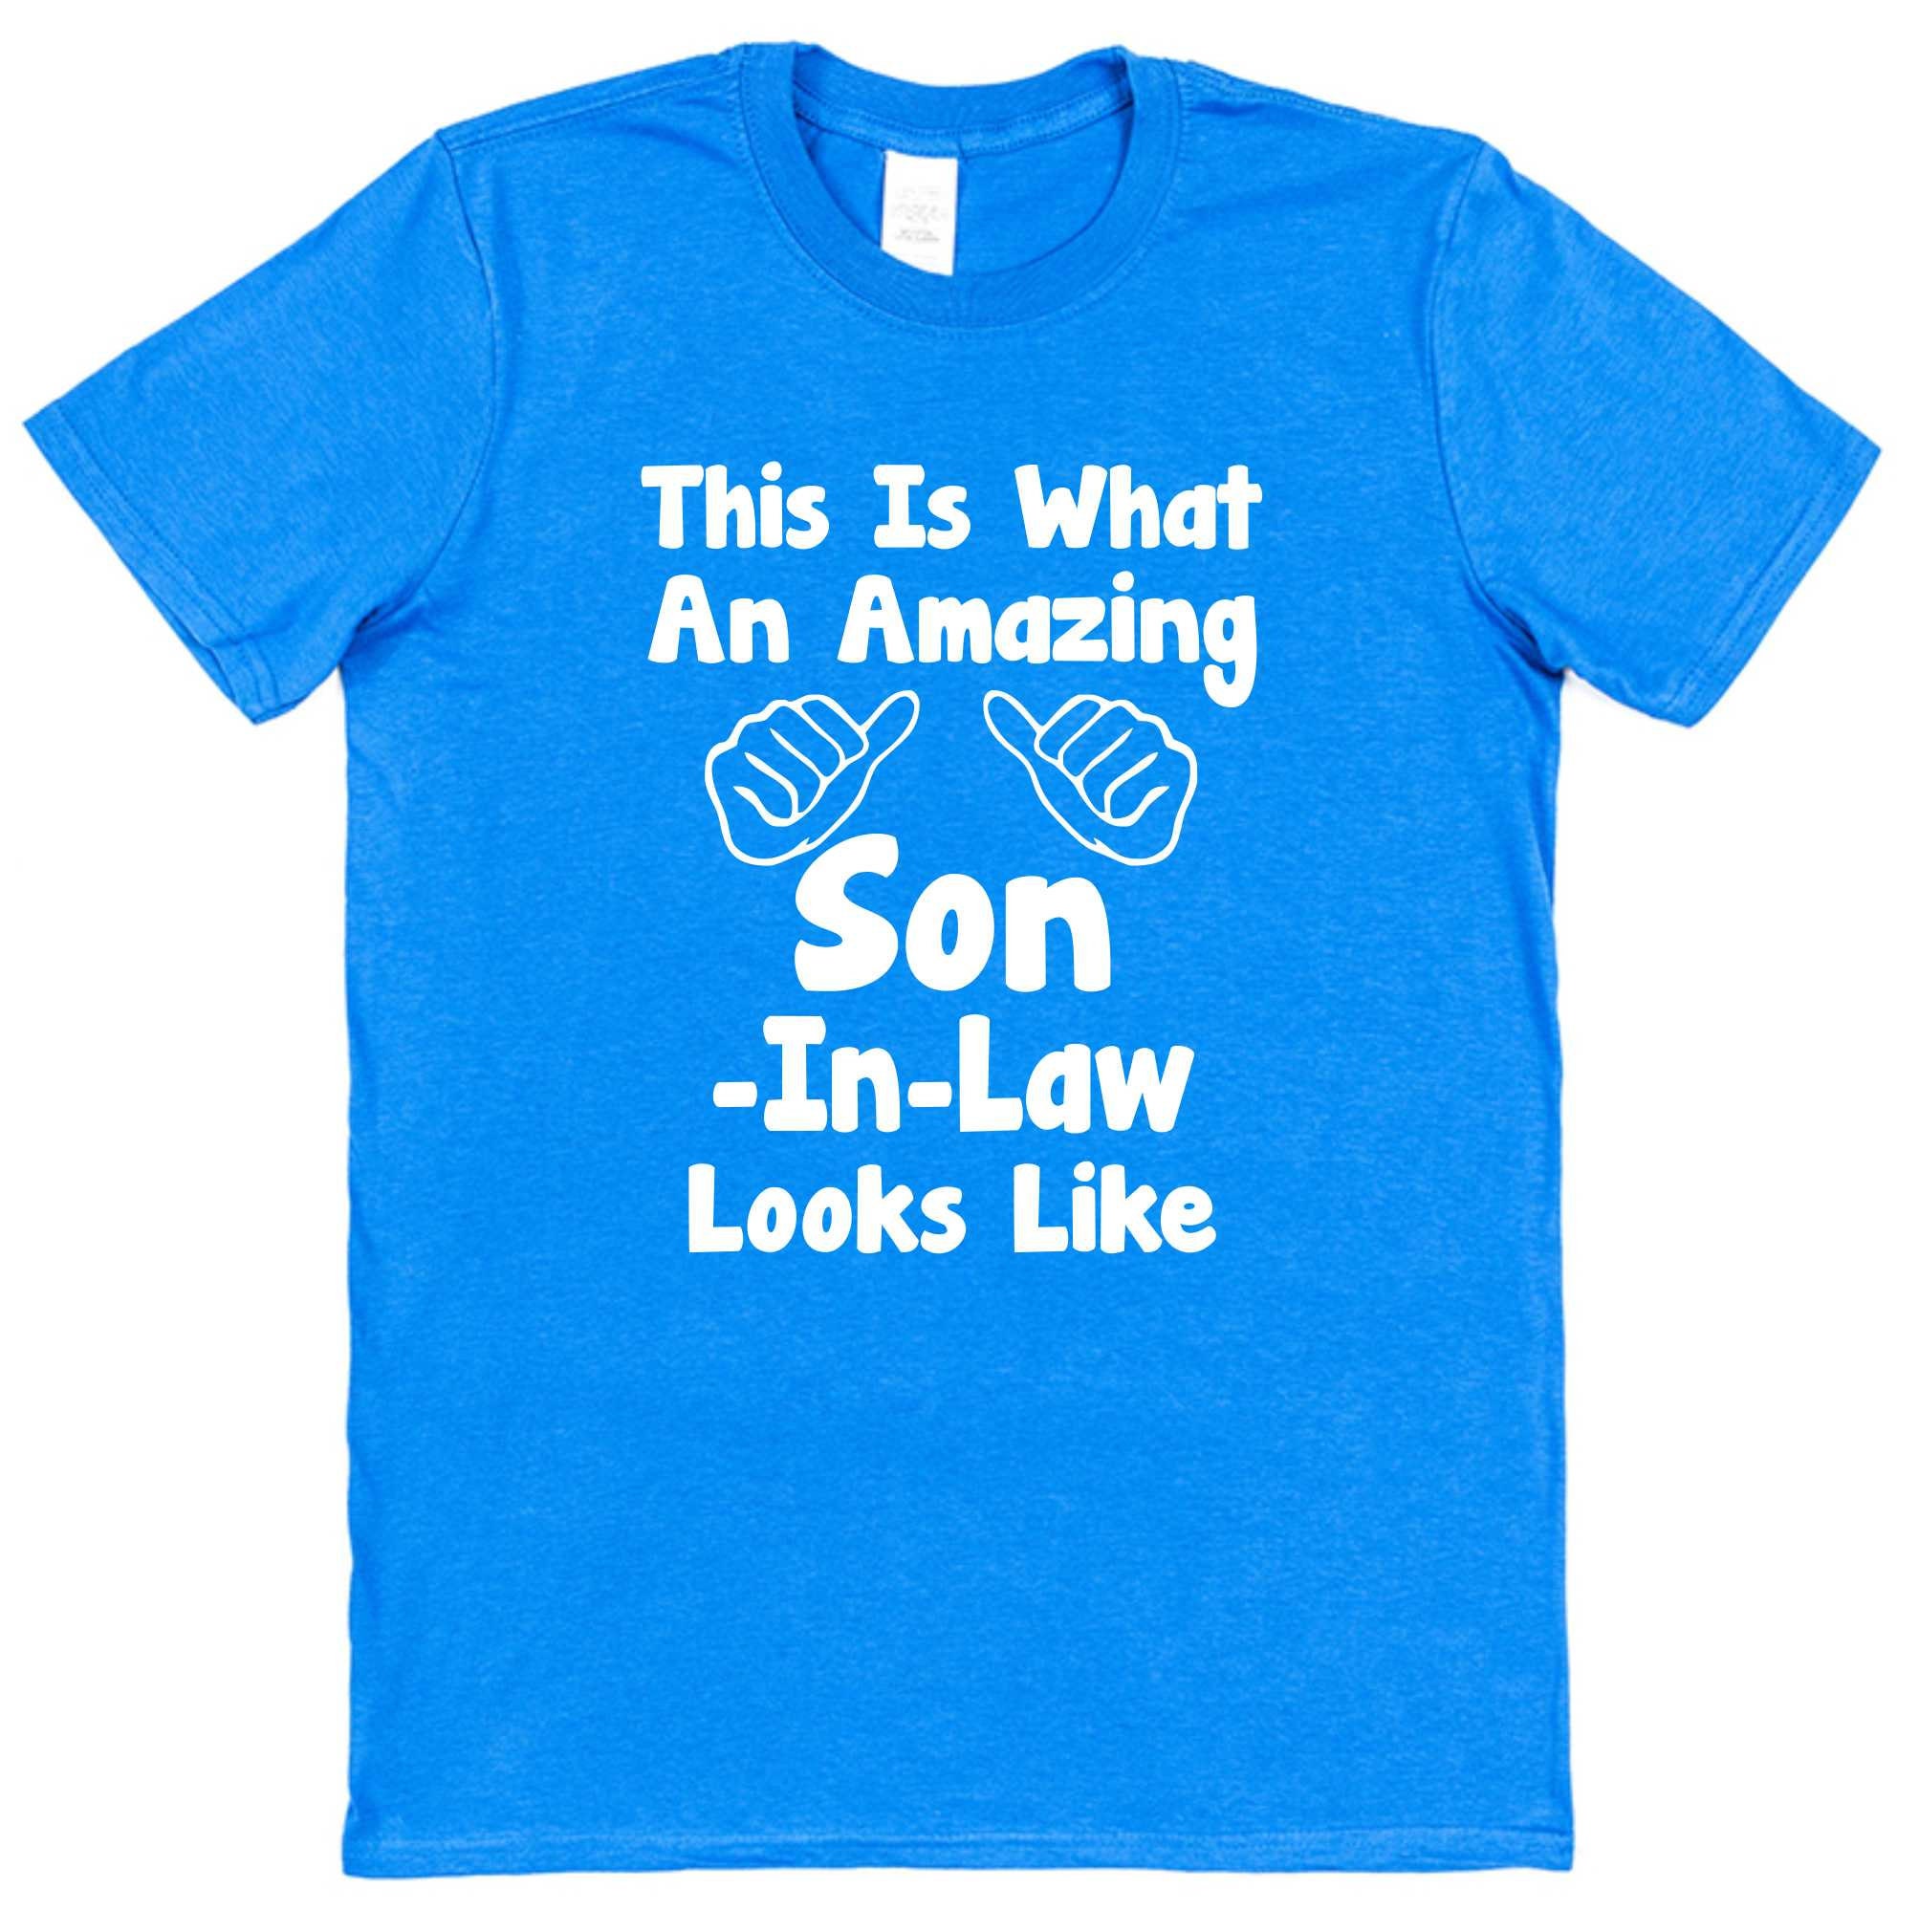 29. "This Is What An Amazing Son in Law Looks Like" T-Shirt